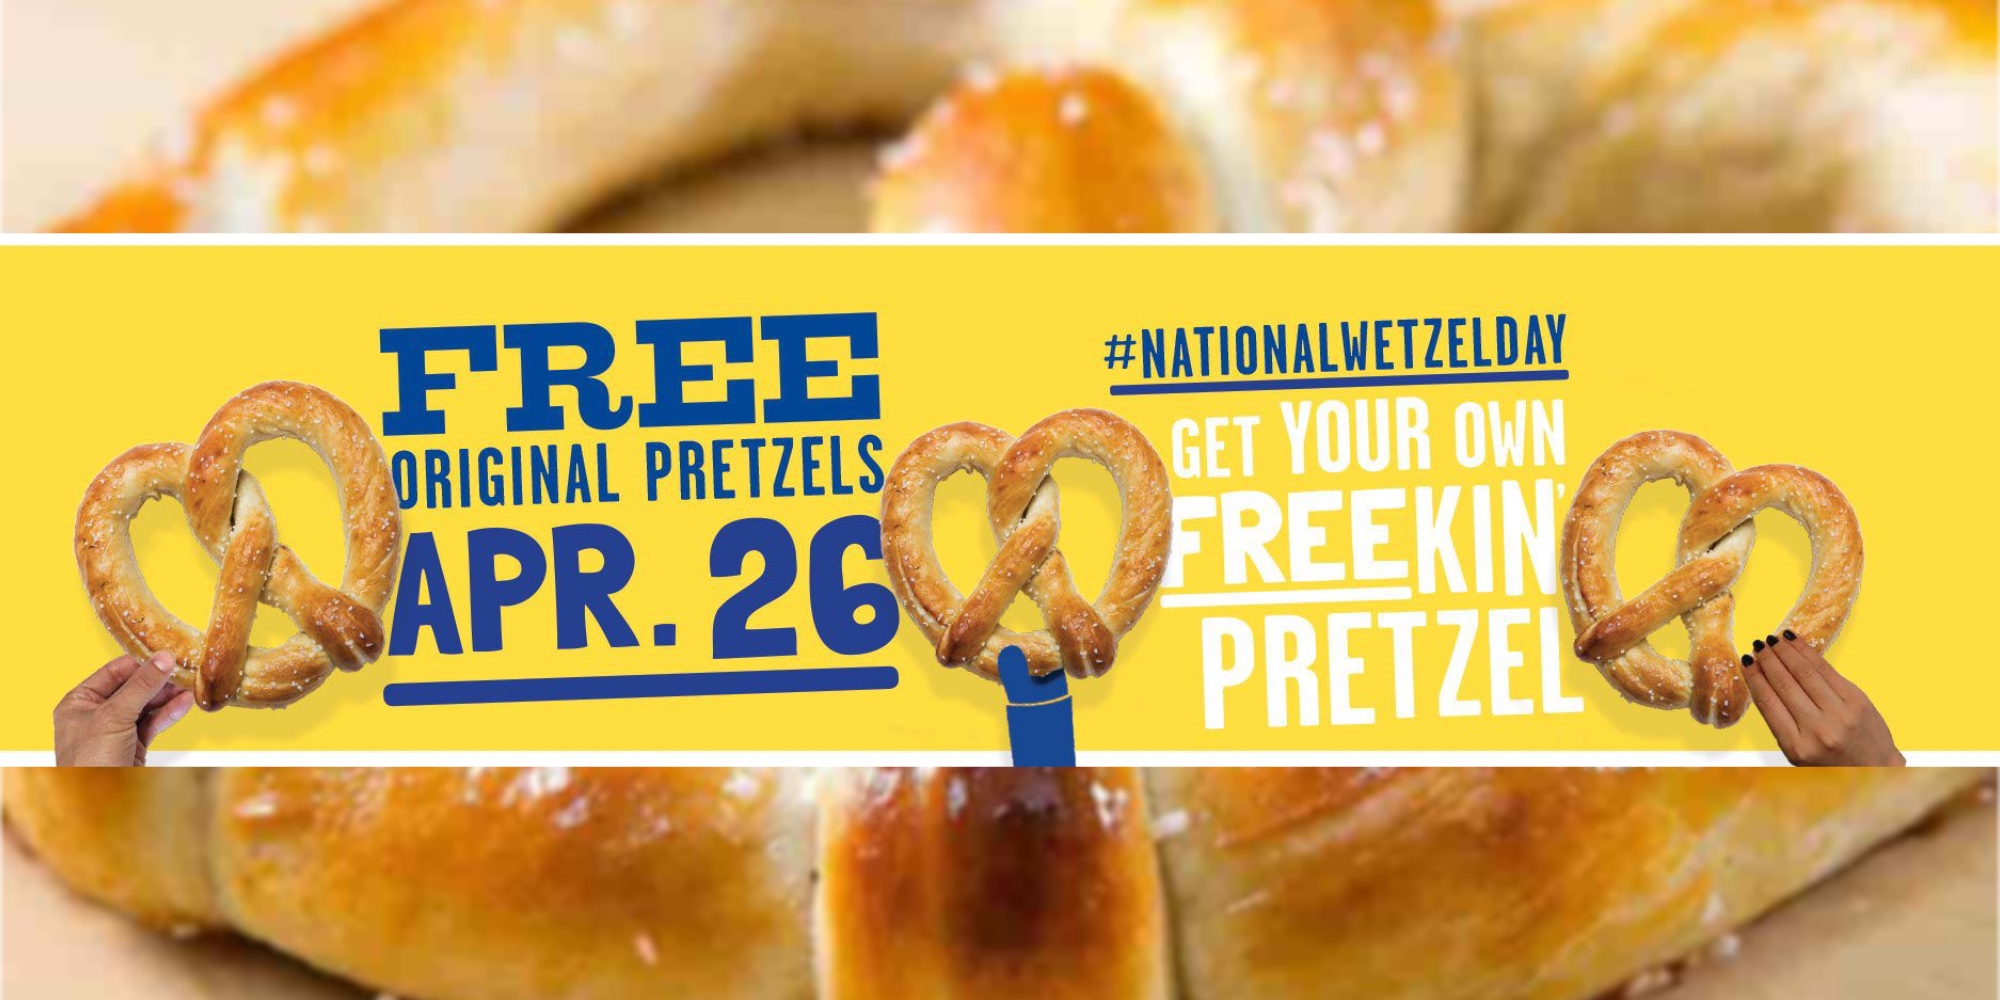 Best Pretzel Day deals includes freebies and BOGO offers - 9to5Toys